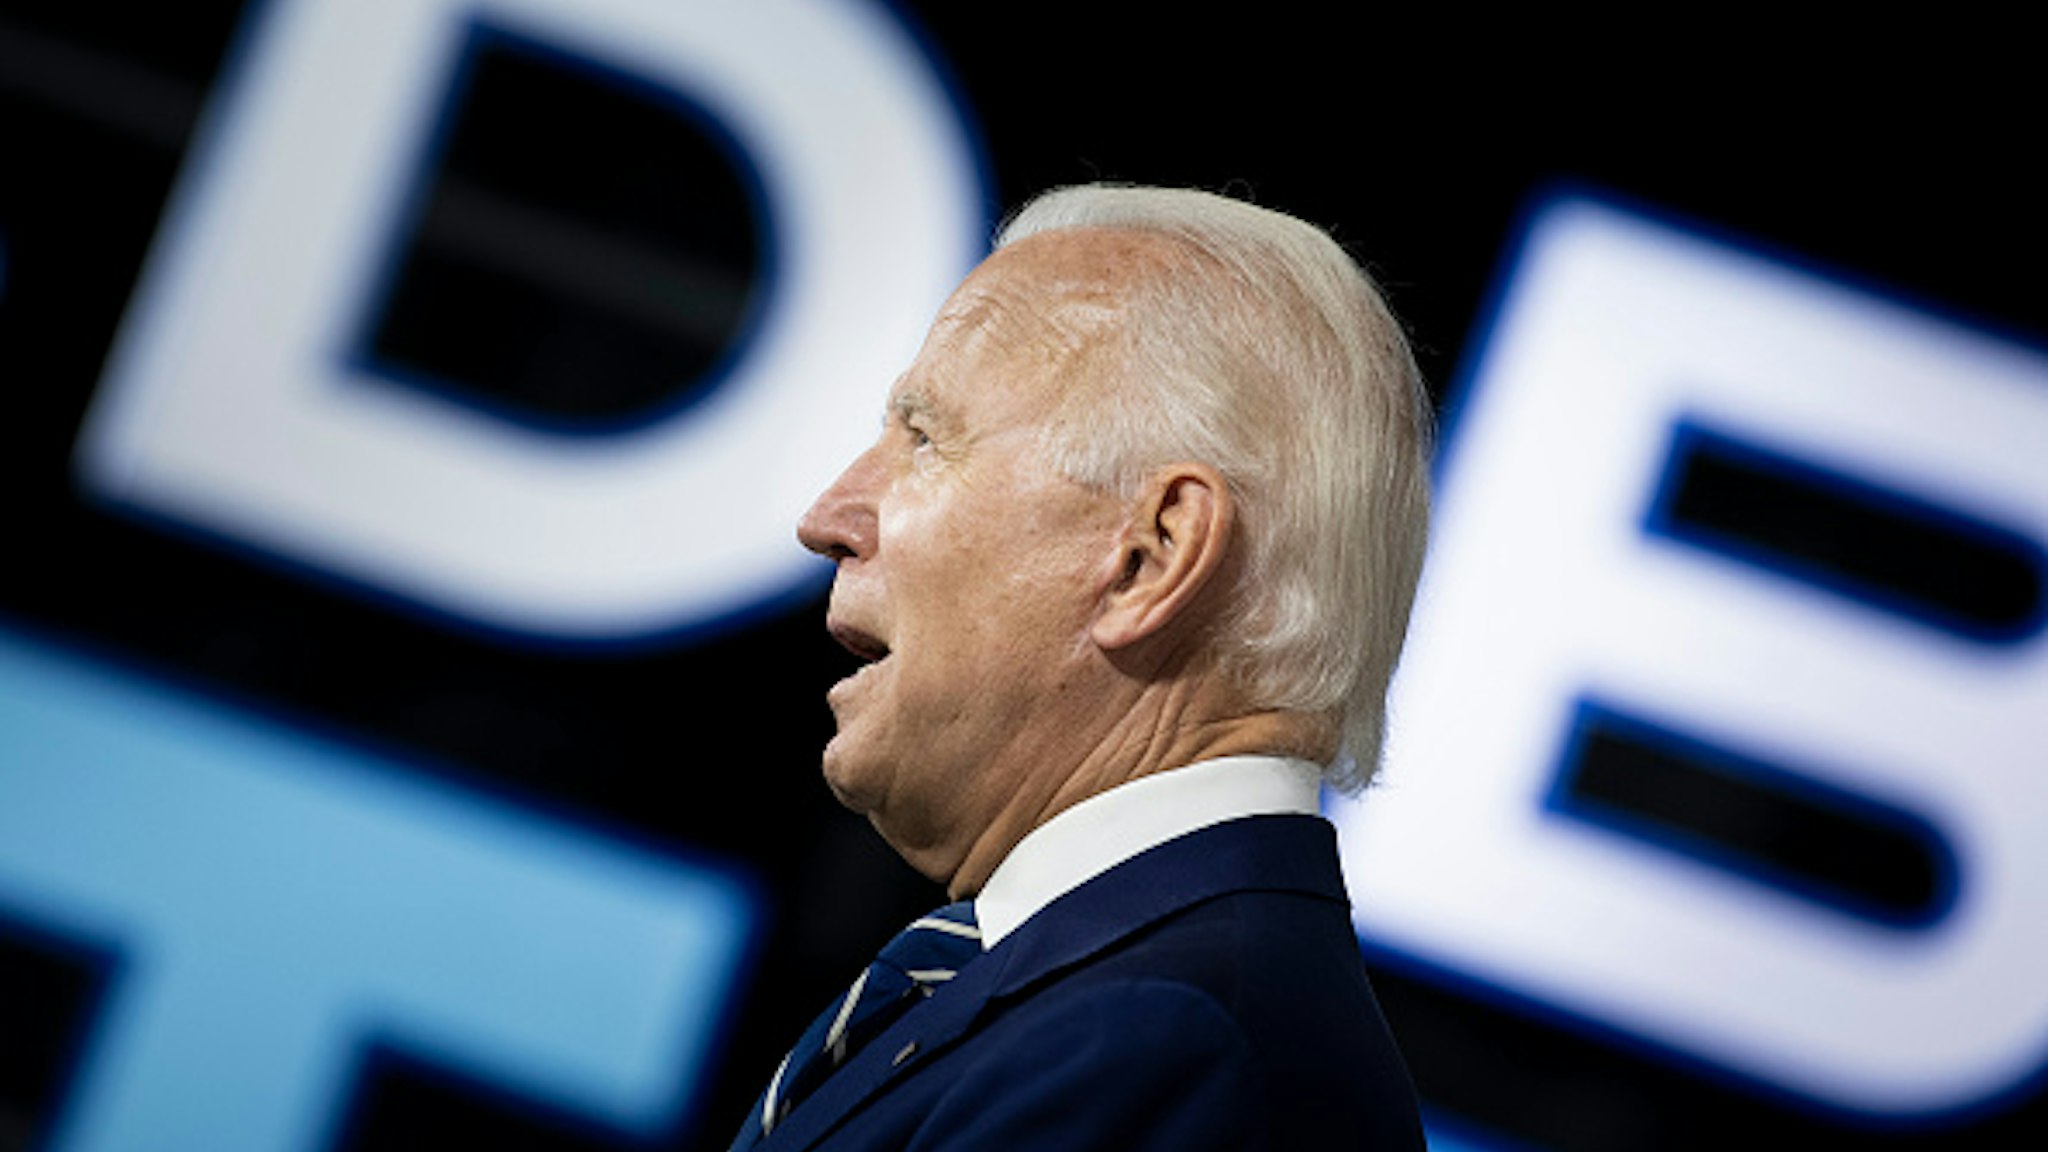 US Democratic presidential candidate Joe Biden speaks about on the third plank of his Build Back Better economic recovery plan for working families, on July 21, 2020, in New Castle, Delaware.